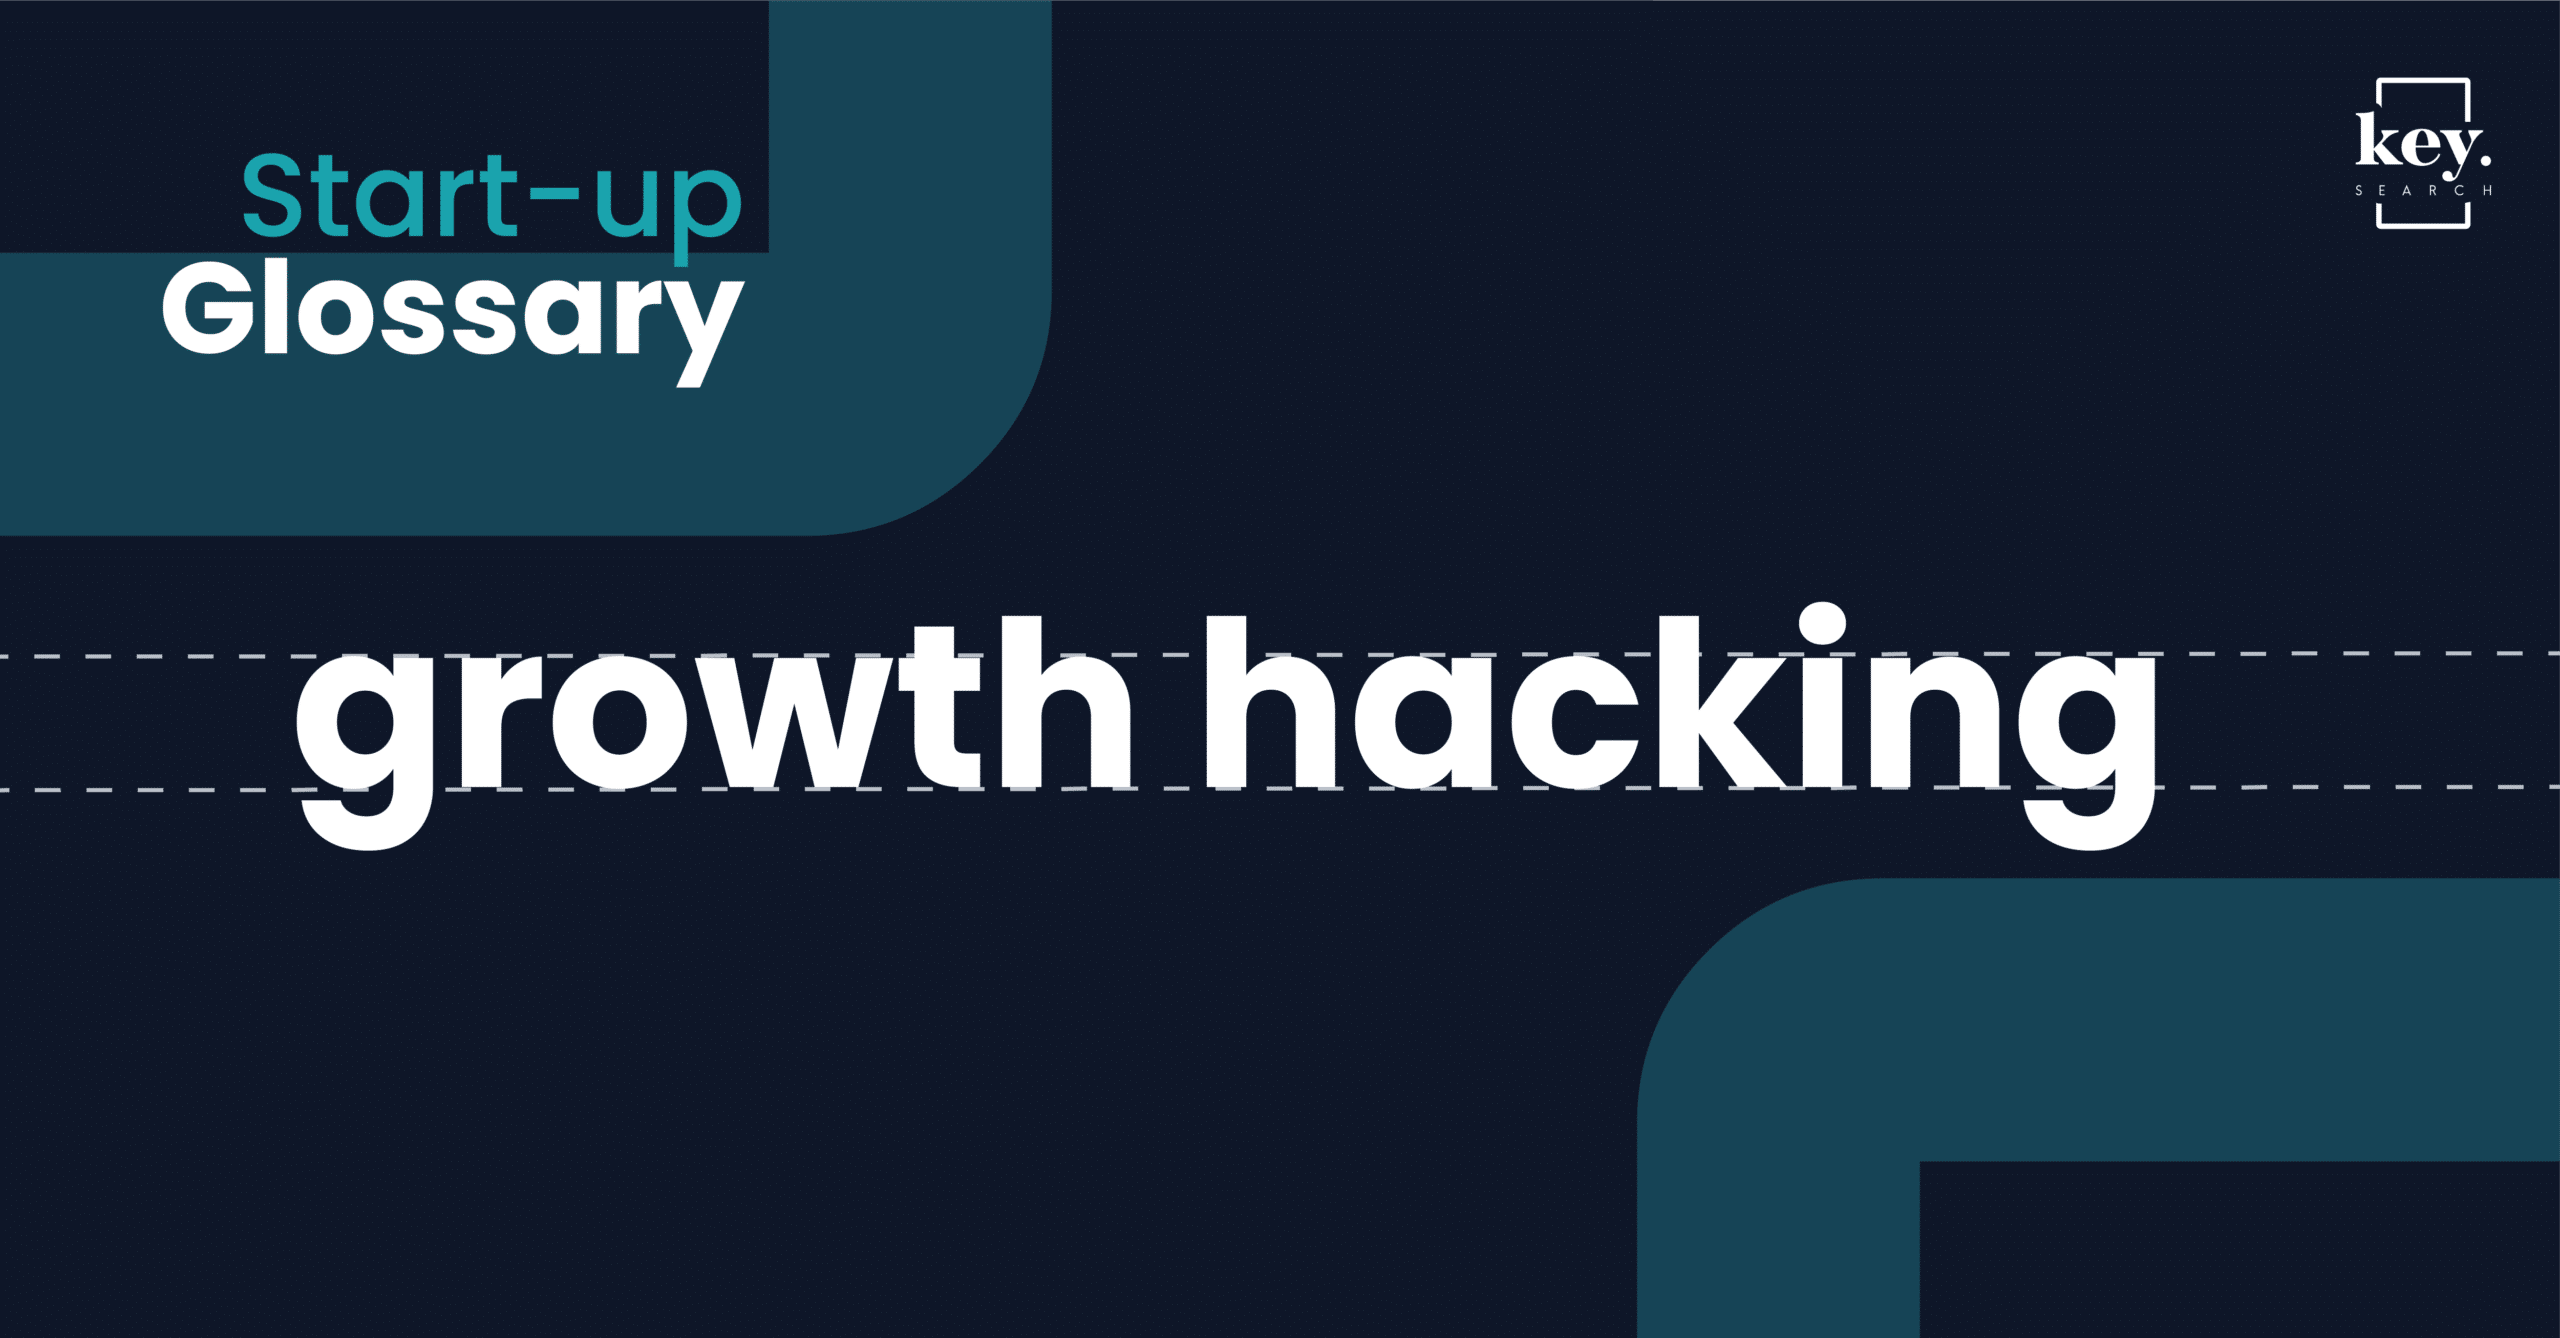 Start-up Glossary_Growth Hacking